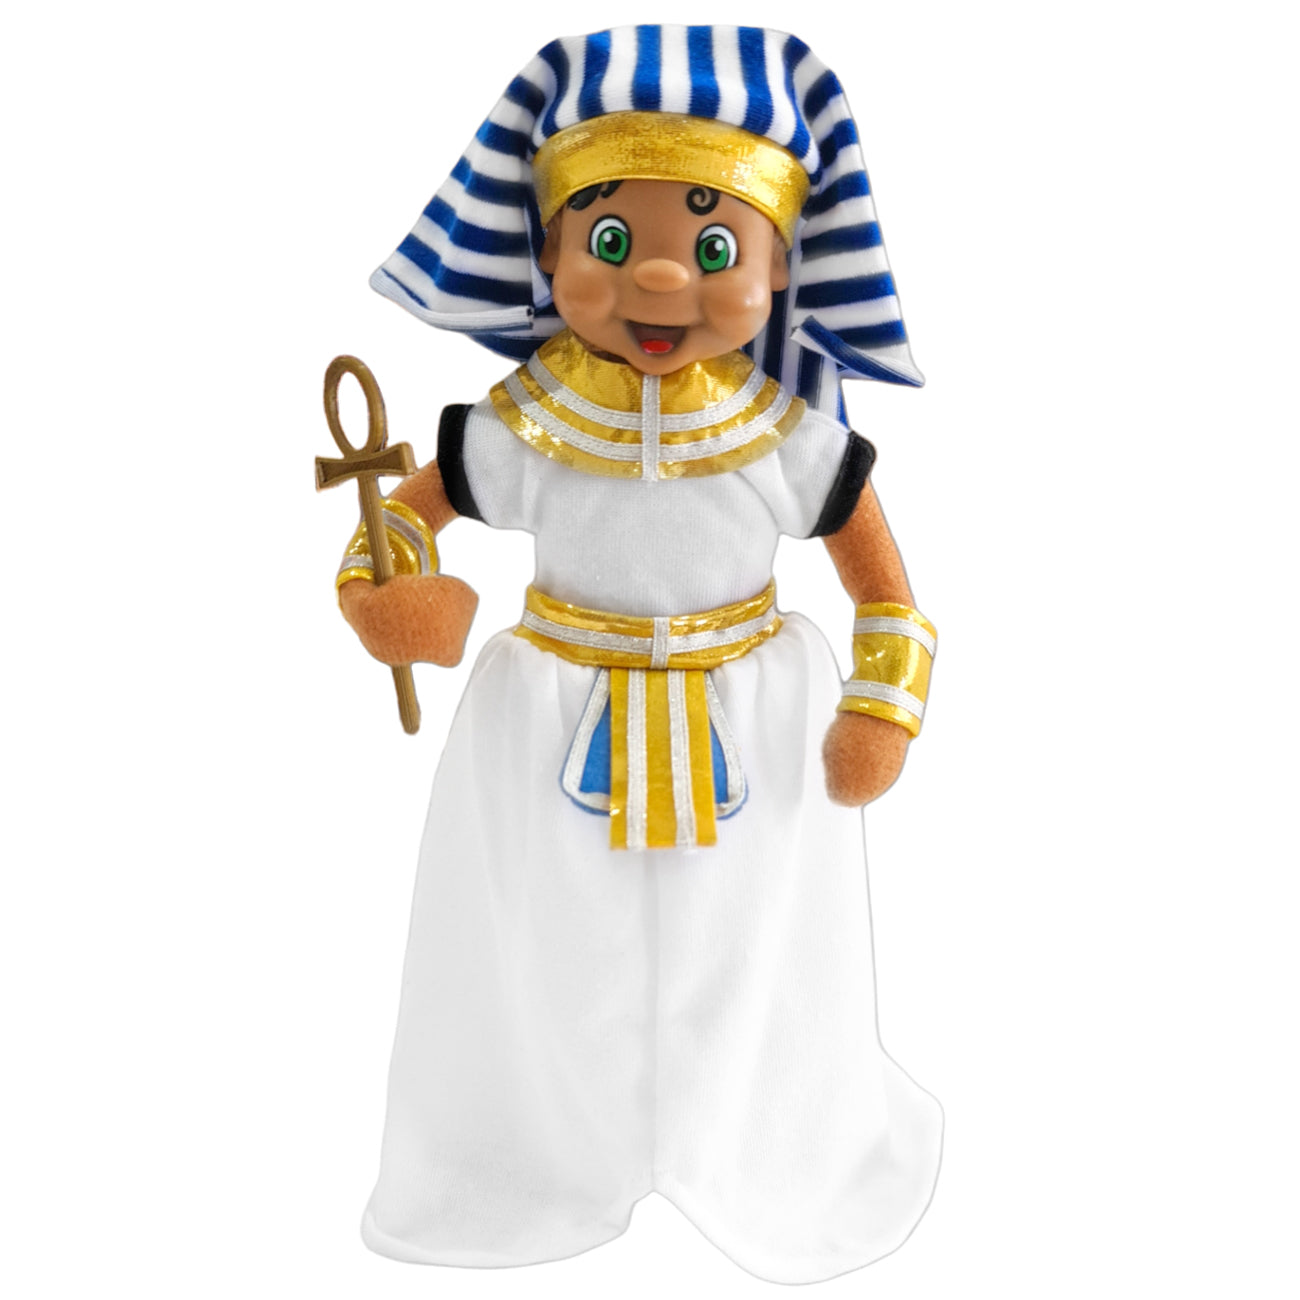 Egyptian costume worn by an elf